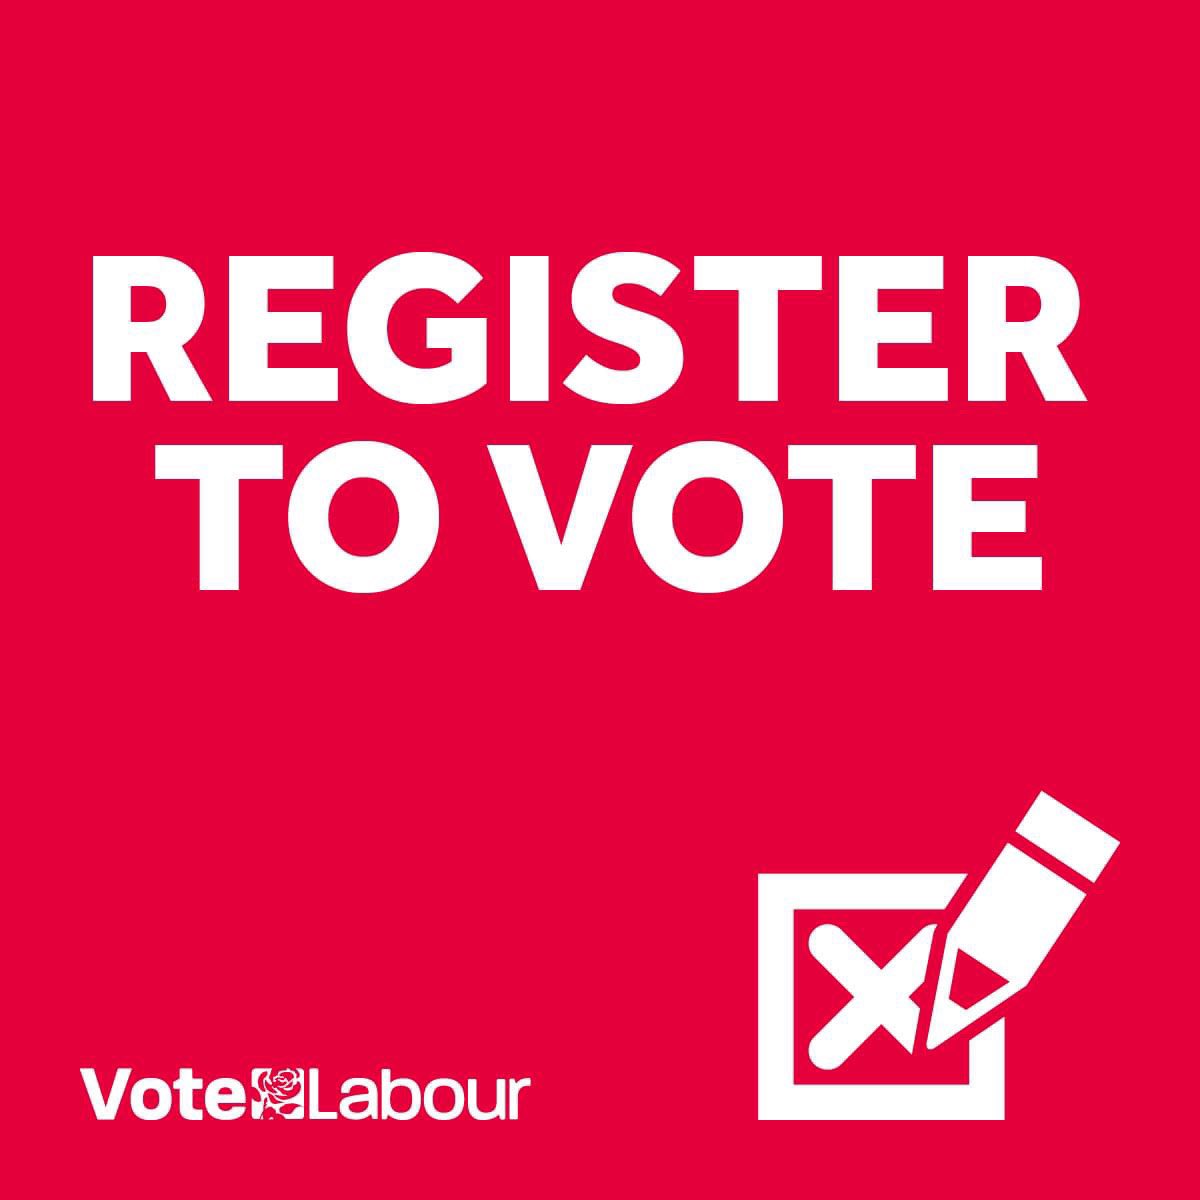 There’s still time to #RegisterToVote ahead of the upcoming Police & Crime Commissioner Elections. Make sure your voice is heard by registering today 👇 gov.uk/register-to-vo…